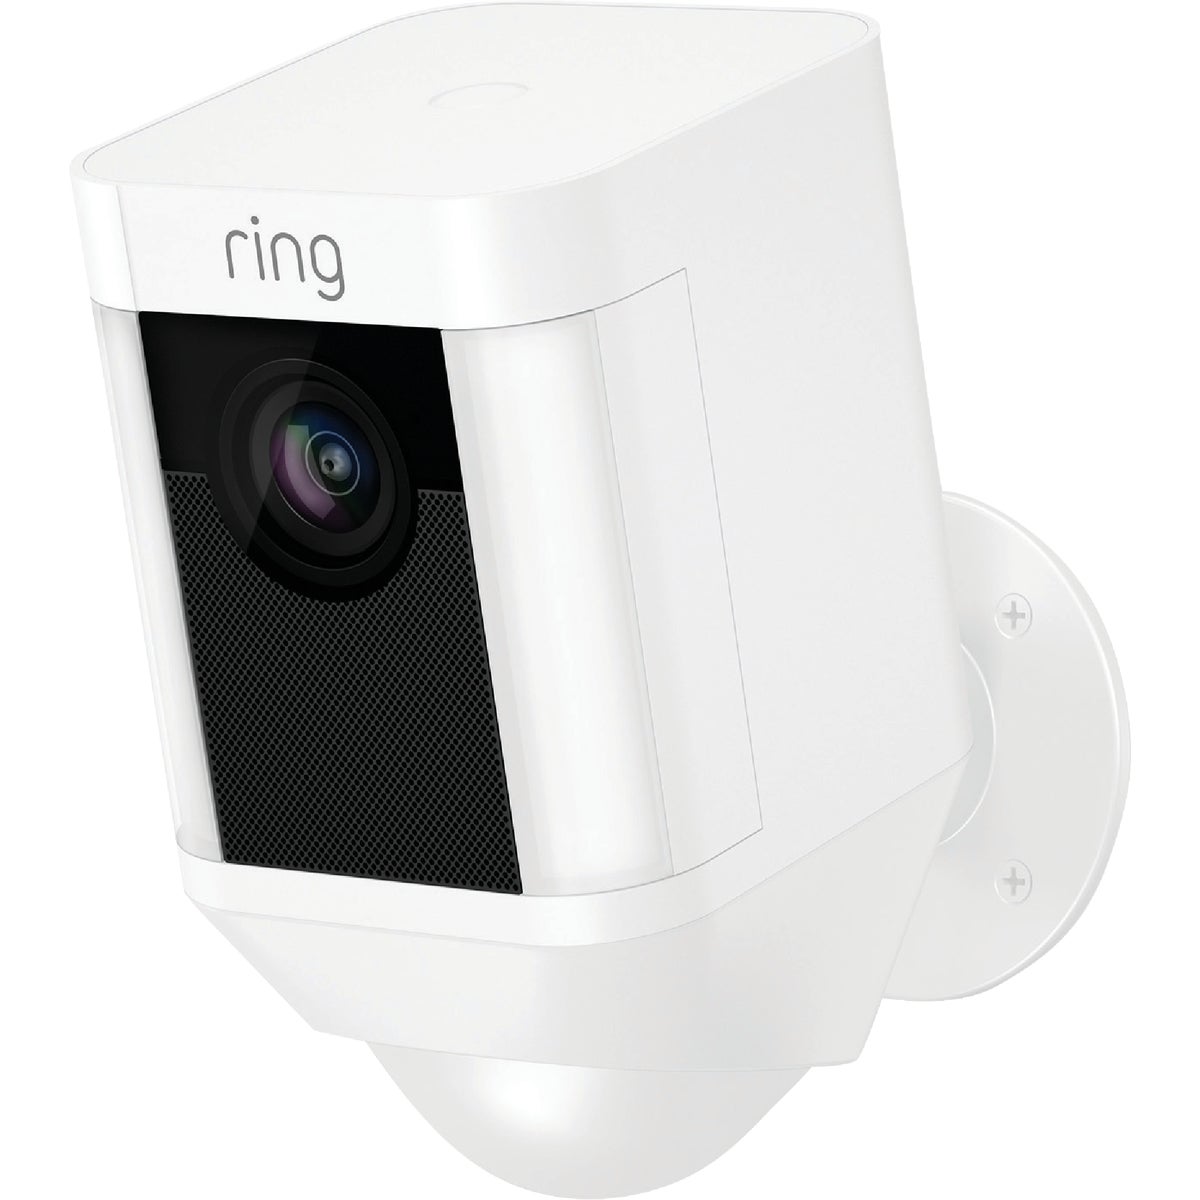 Item 502450, Wireless spotlight cam that connects to Wi-Fi and streams live high 